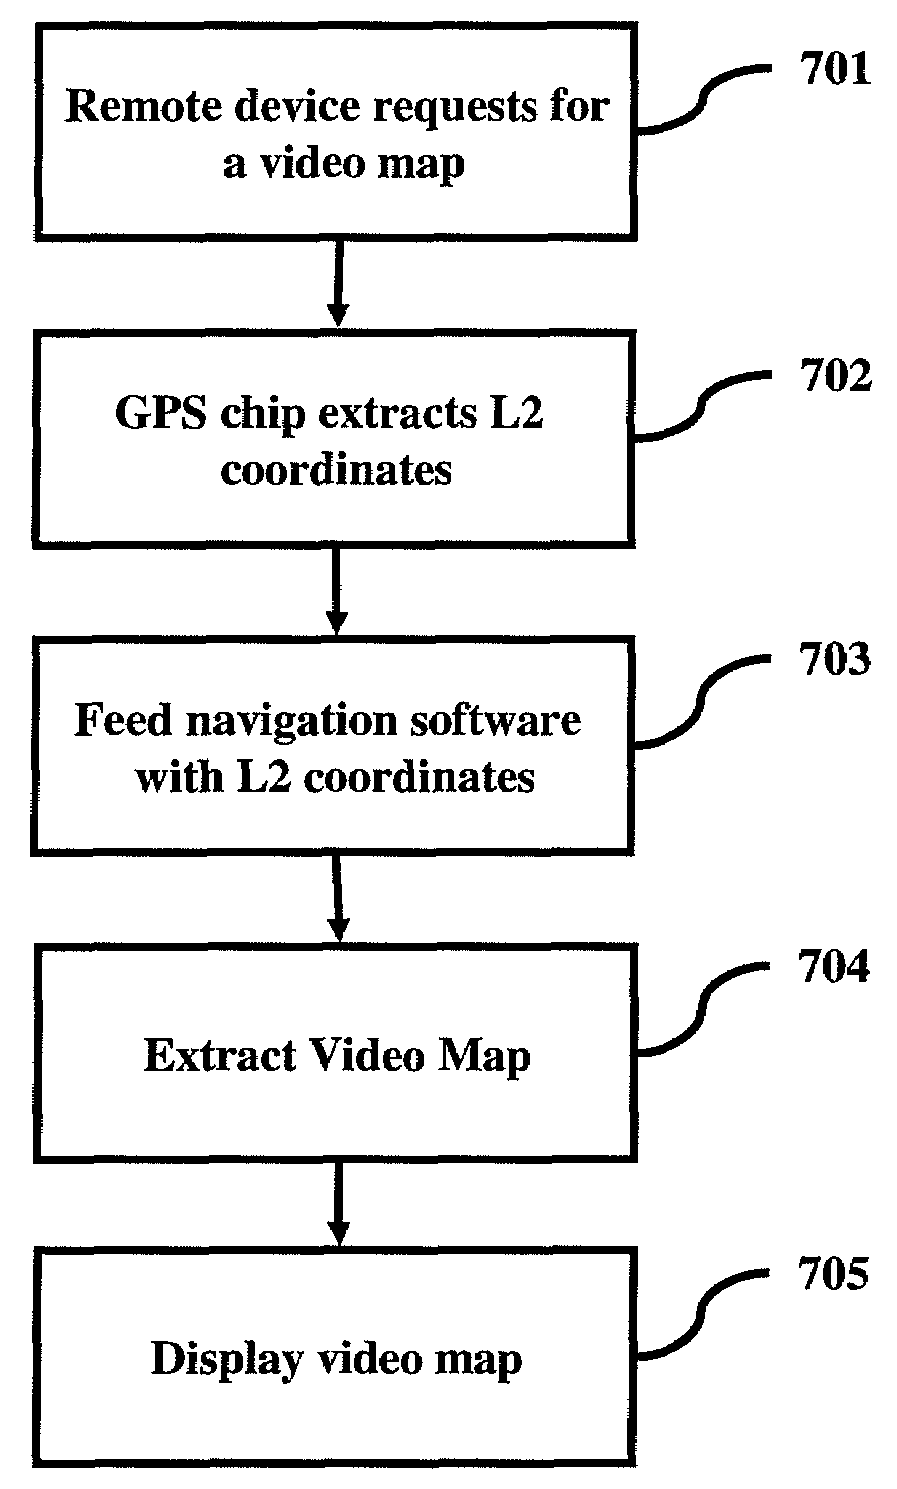 Video map technology for navigation